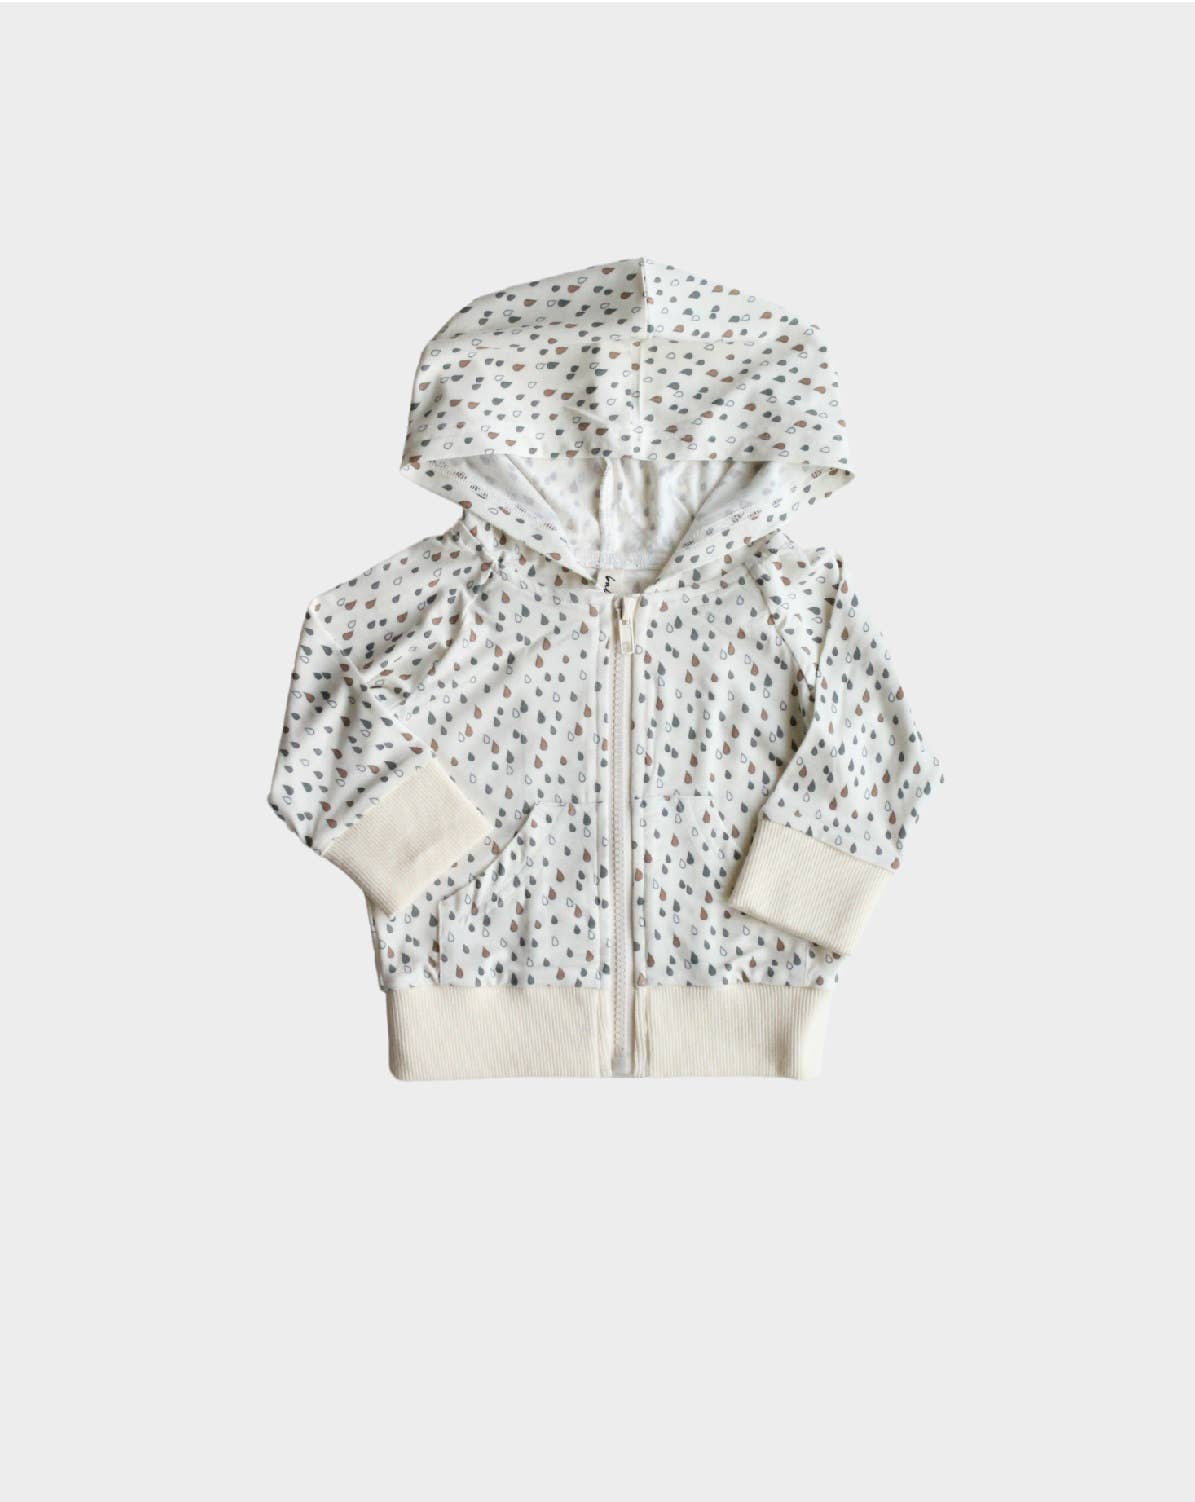 babysprouts clothing company - S23 D1: Bamboo Hooded Jacket in Raindrops